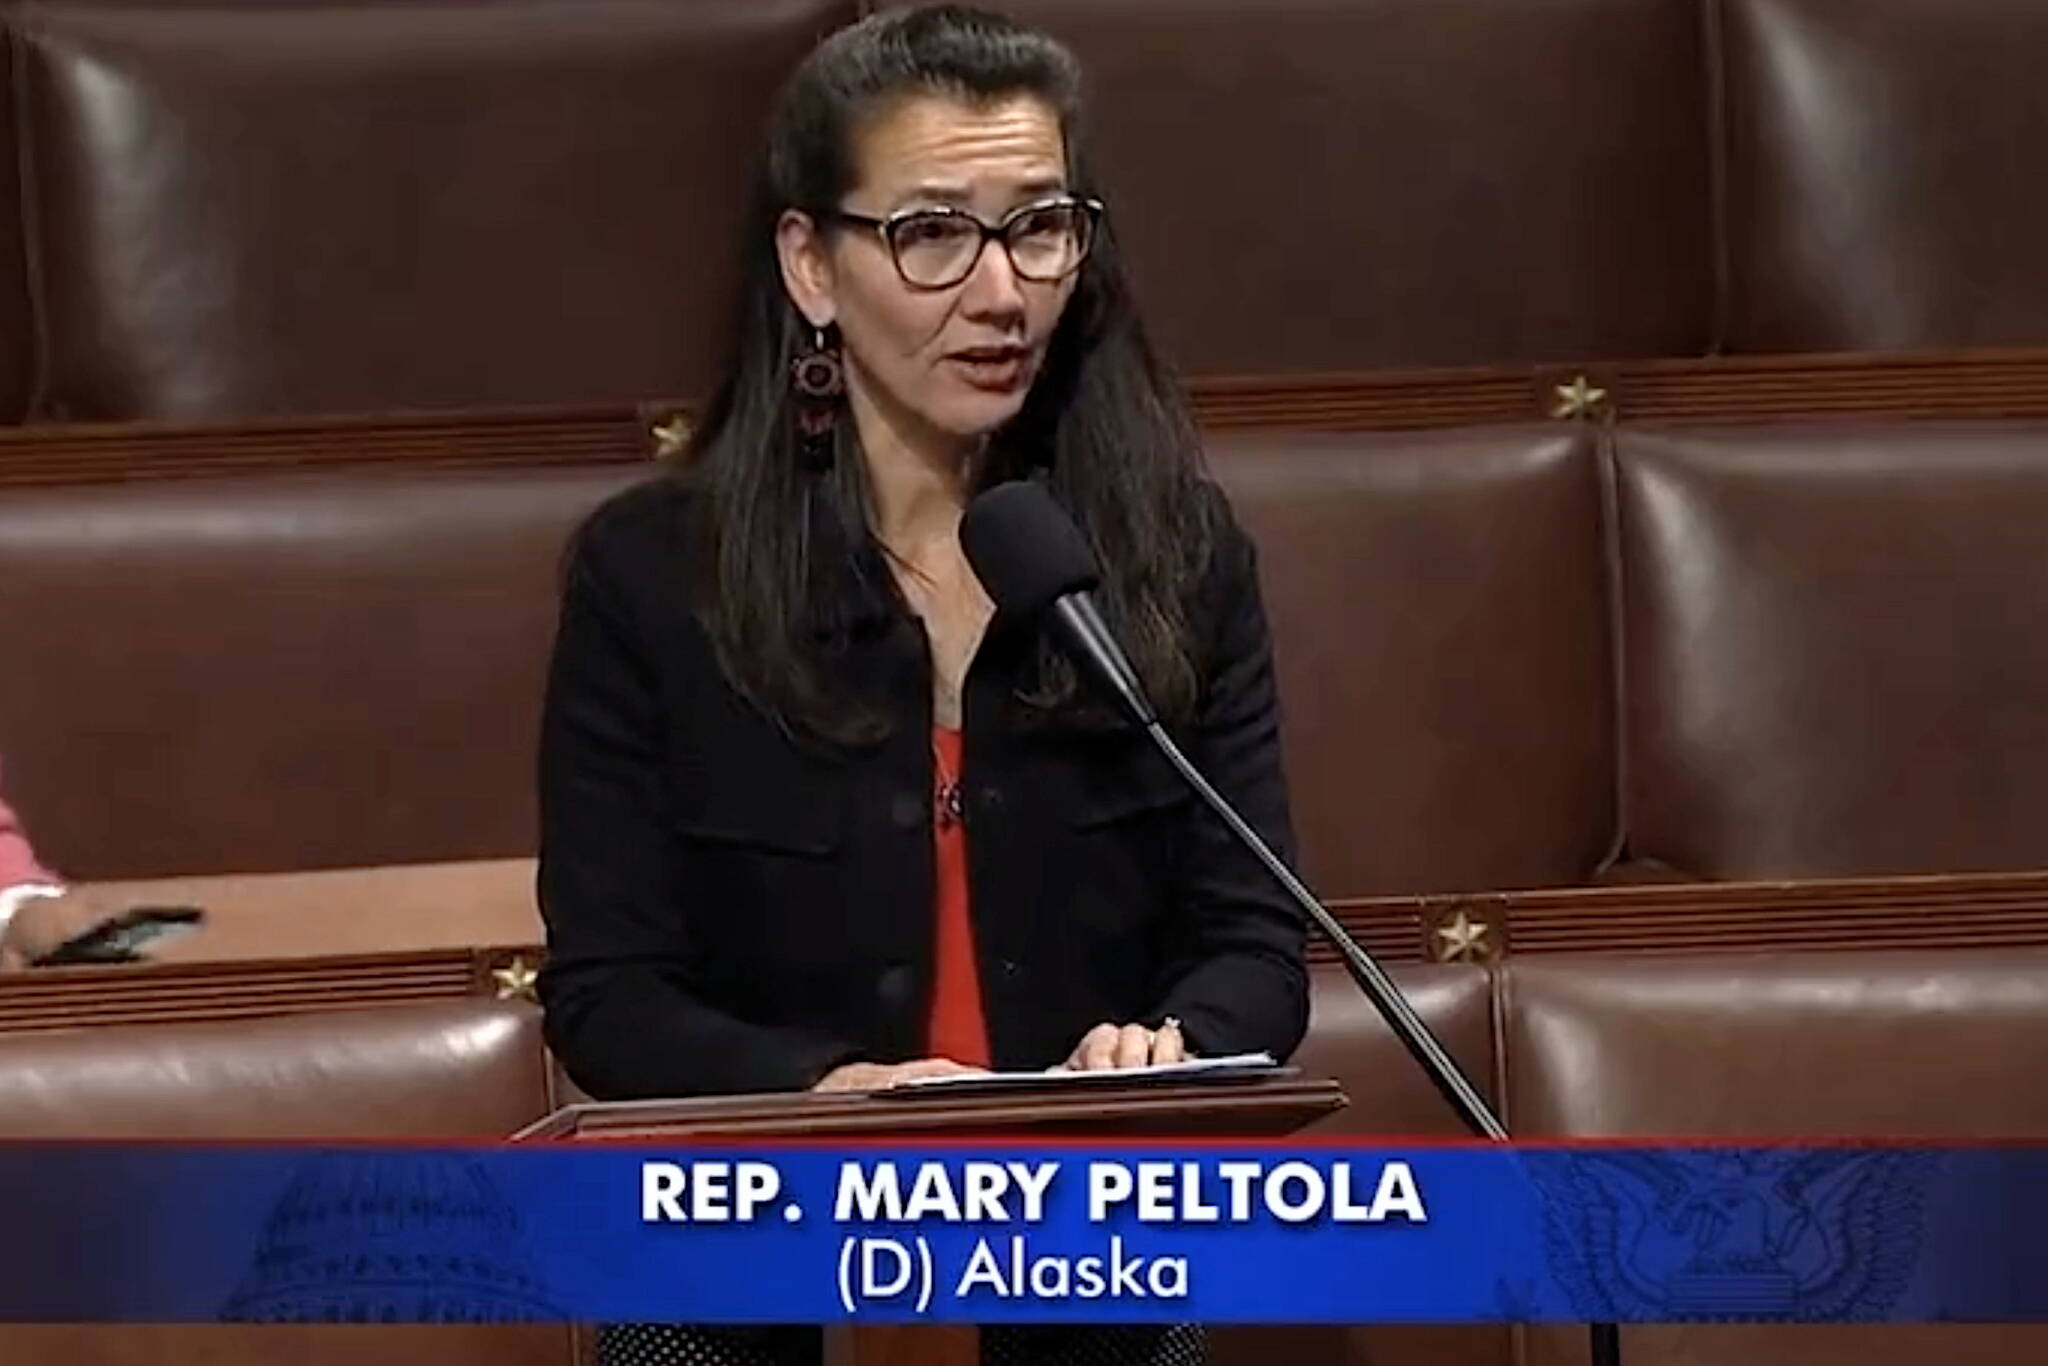 Rep. Mary Peltola, an Alaska Democrat, delivers a speech on the U.S. House floor before Thursday’s vote approving her first bill, establishing an Office of Food Security in the Department of Veterans Affairs. It passed the House by a 376-49 vote, although its fate in the Senate is undetermined. (Screenshot from official U.S. House video)